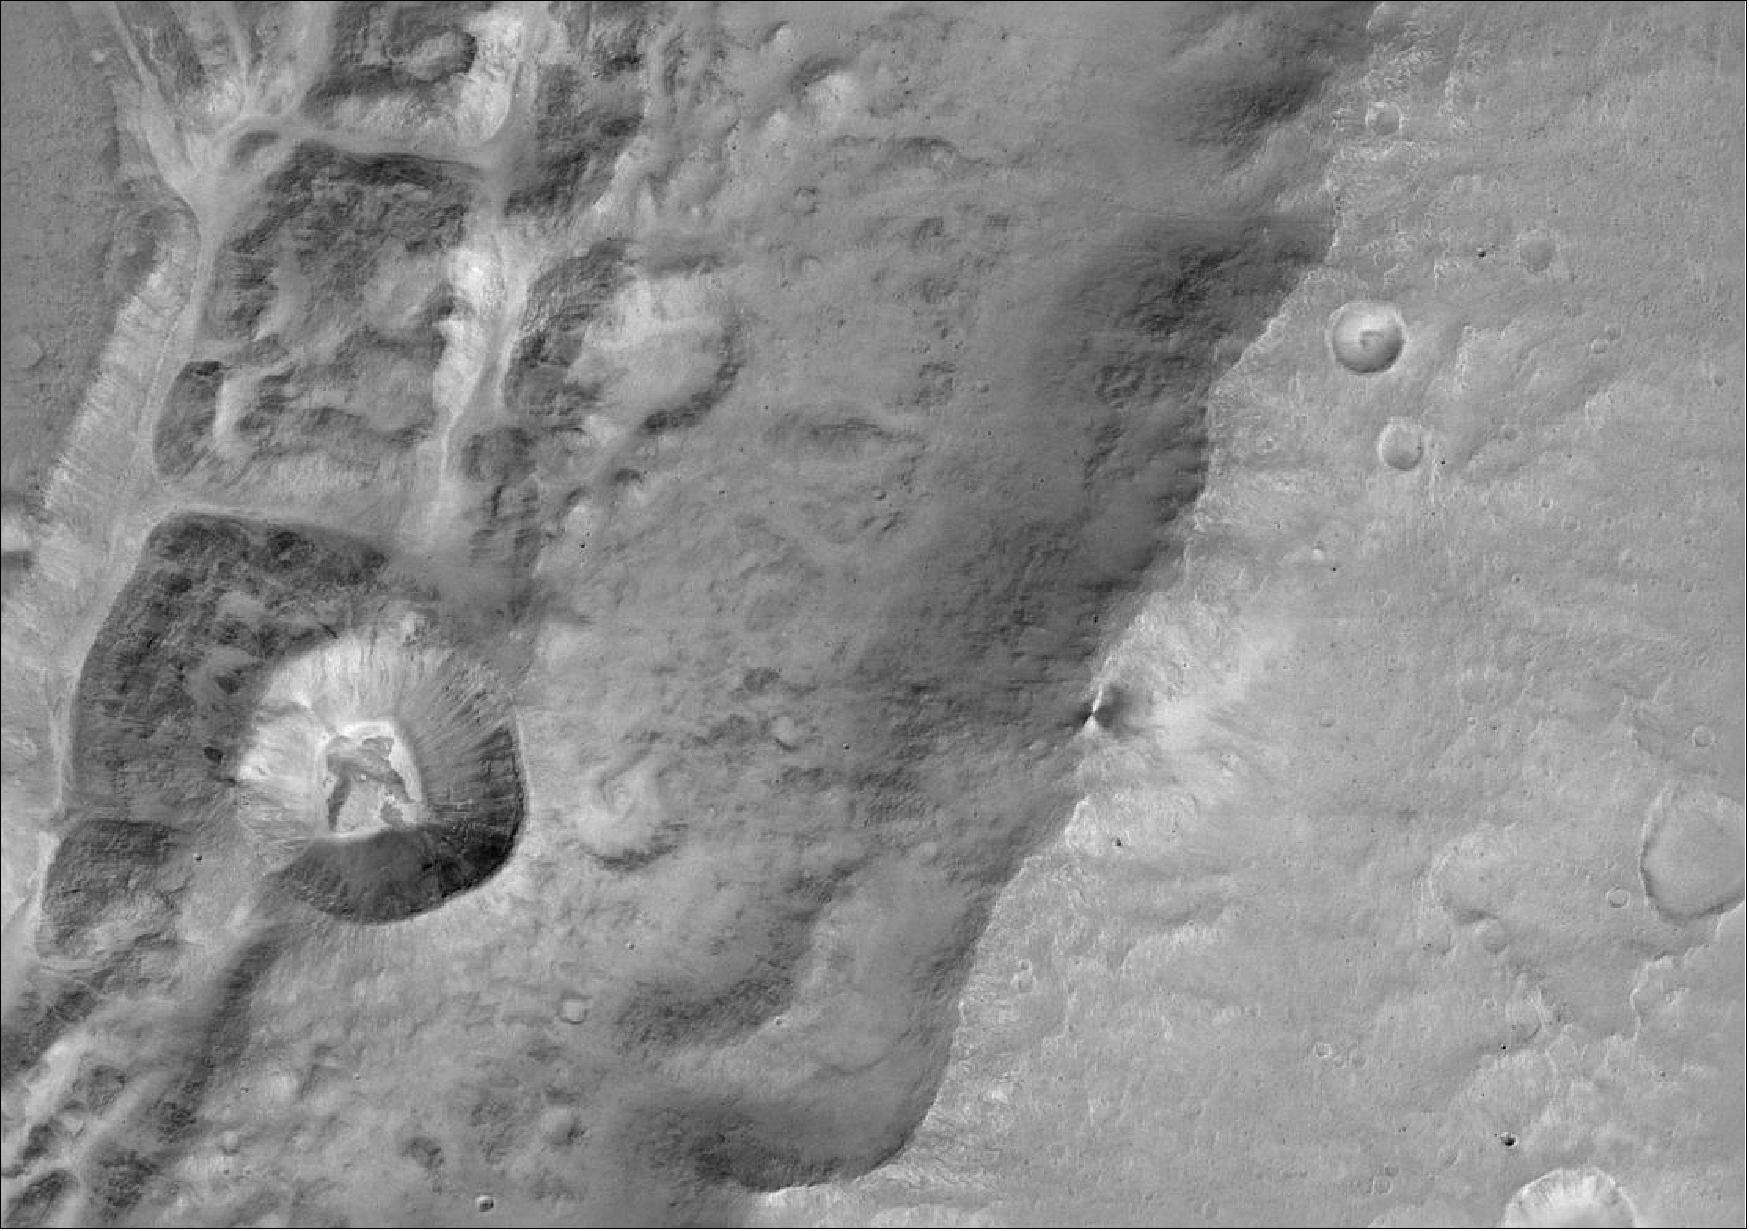 Figure 123: Close-up of the rim of a large unnamed crater north of a crater named Da Vinci, situated near the Mars equator. A smaller, 1.4 km-diameter crater is seen in the rim along the left hand side of the image. The image scale is 7.2 m/pixel. The image was taken on 22 November 2016 and is one of the first acquired by the CaSSIS (Color and Stereo Surface Imaging System) onboard the ExoMars TGO. The image was taken as part of an eight-day campaign to test the science instruments for the first time since arriving at the Red Planet on 19 October (image credit: ESA/Roscosmos/ExoMars/CaSSIS/UniBE)